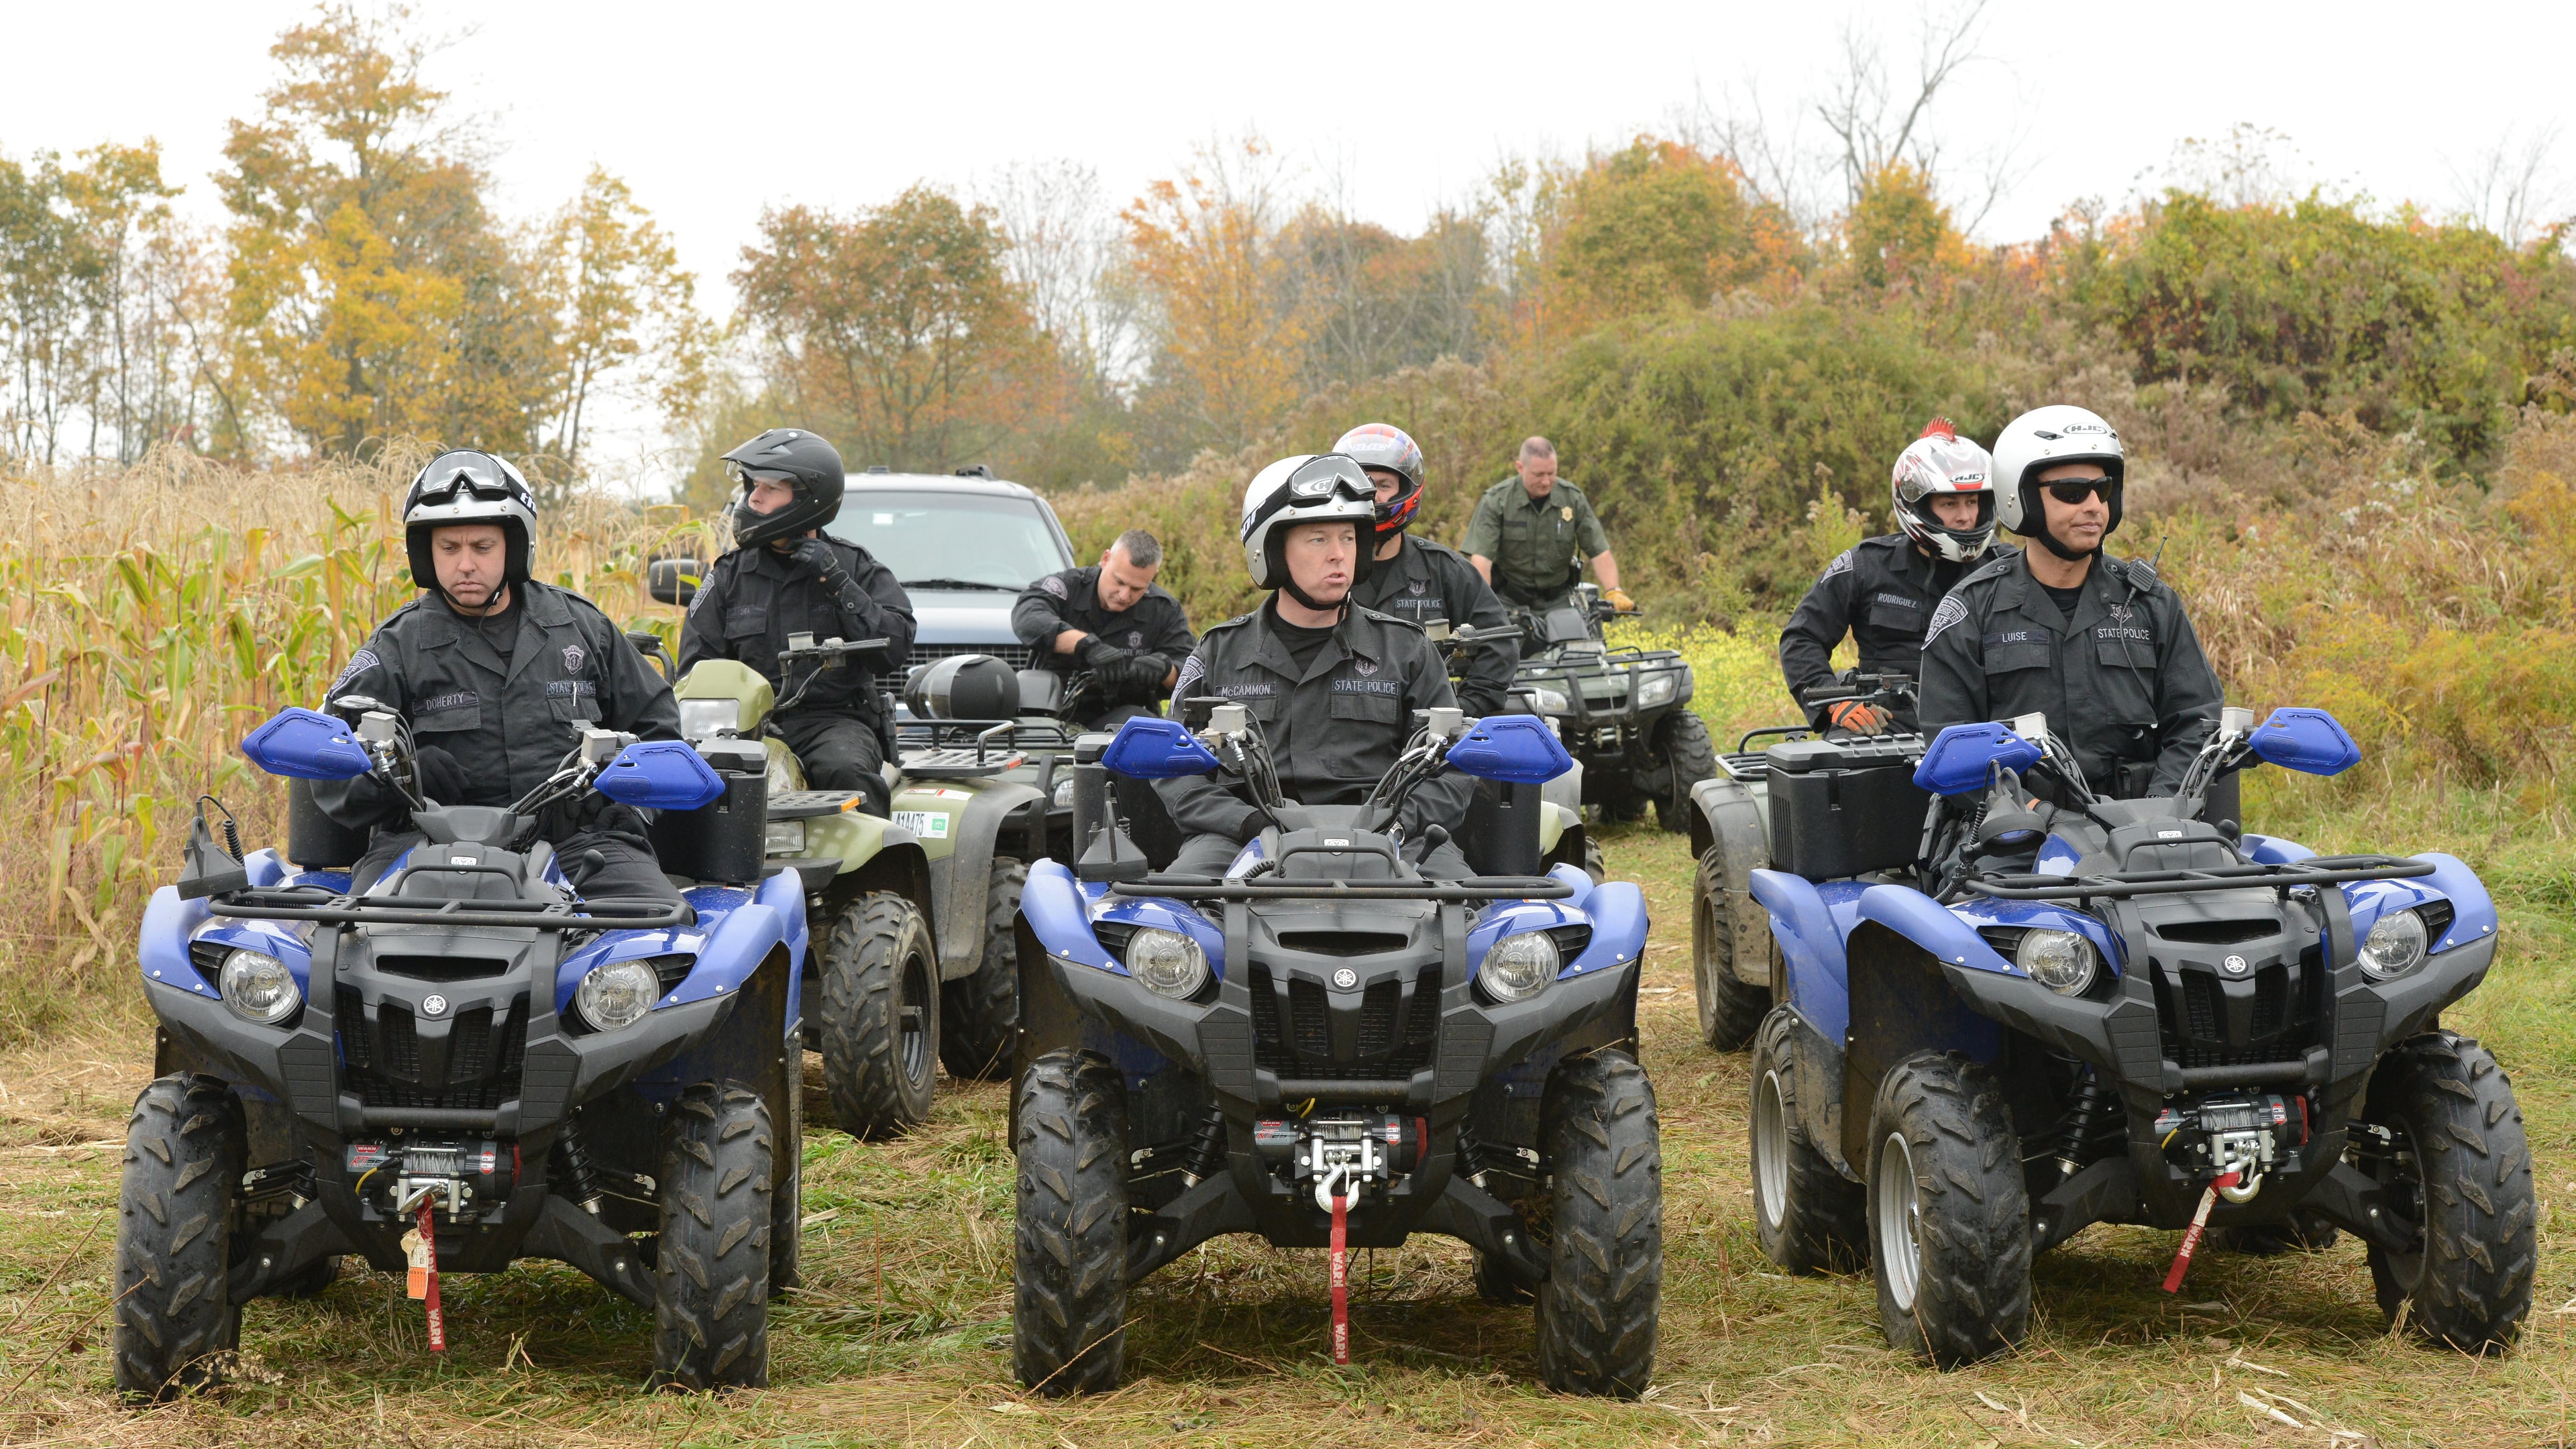 Members of the unit on all-terrain-vehicles (ATVs)